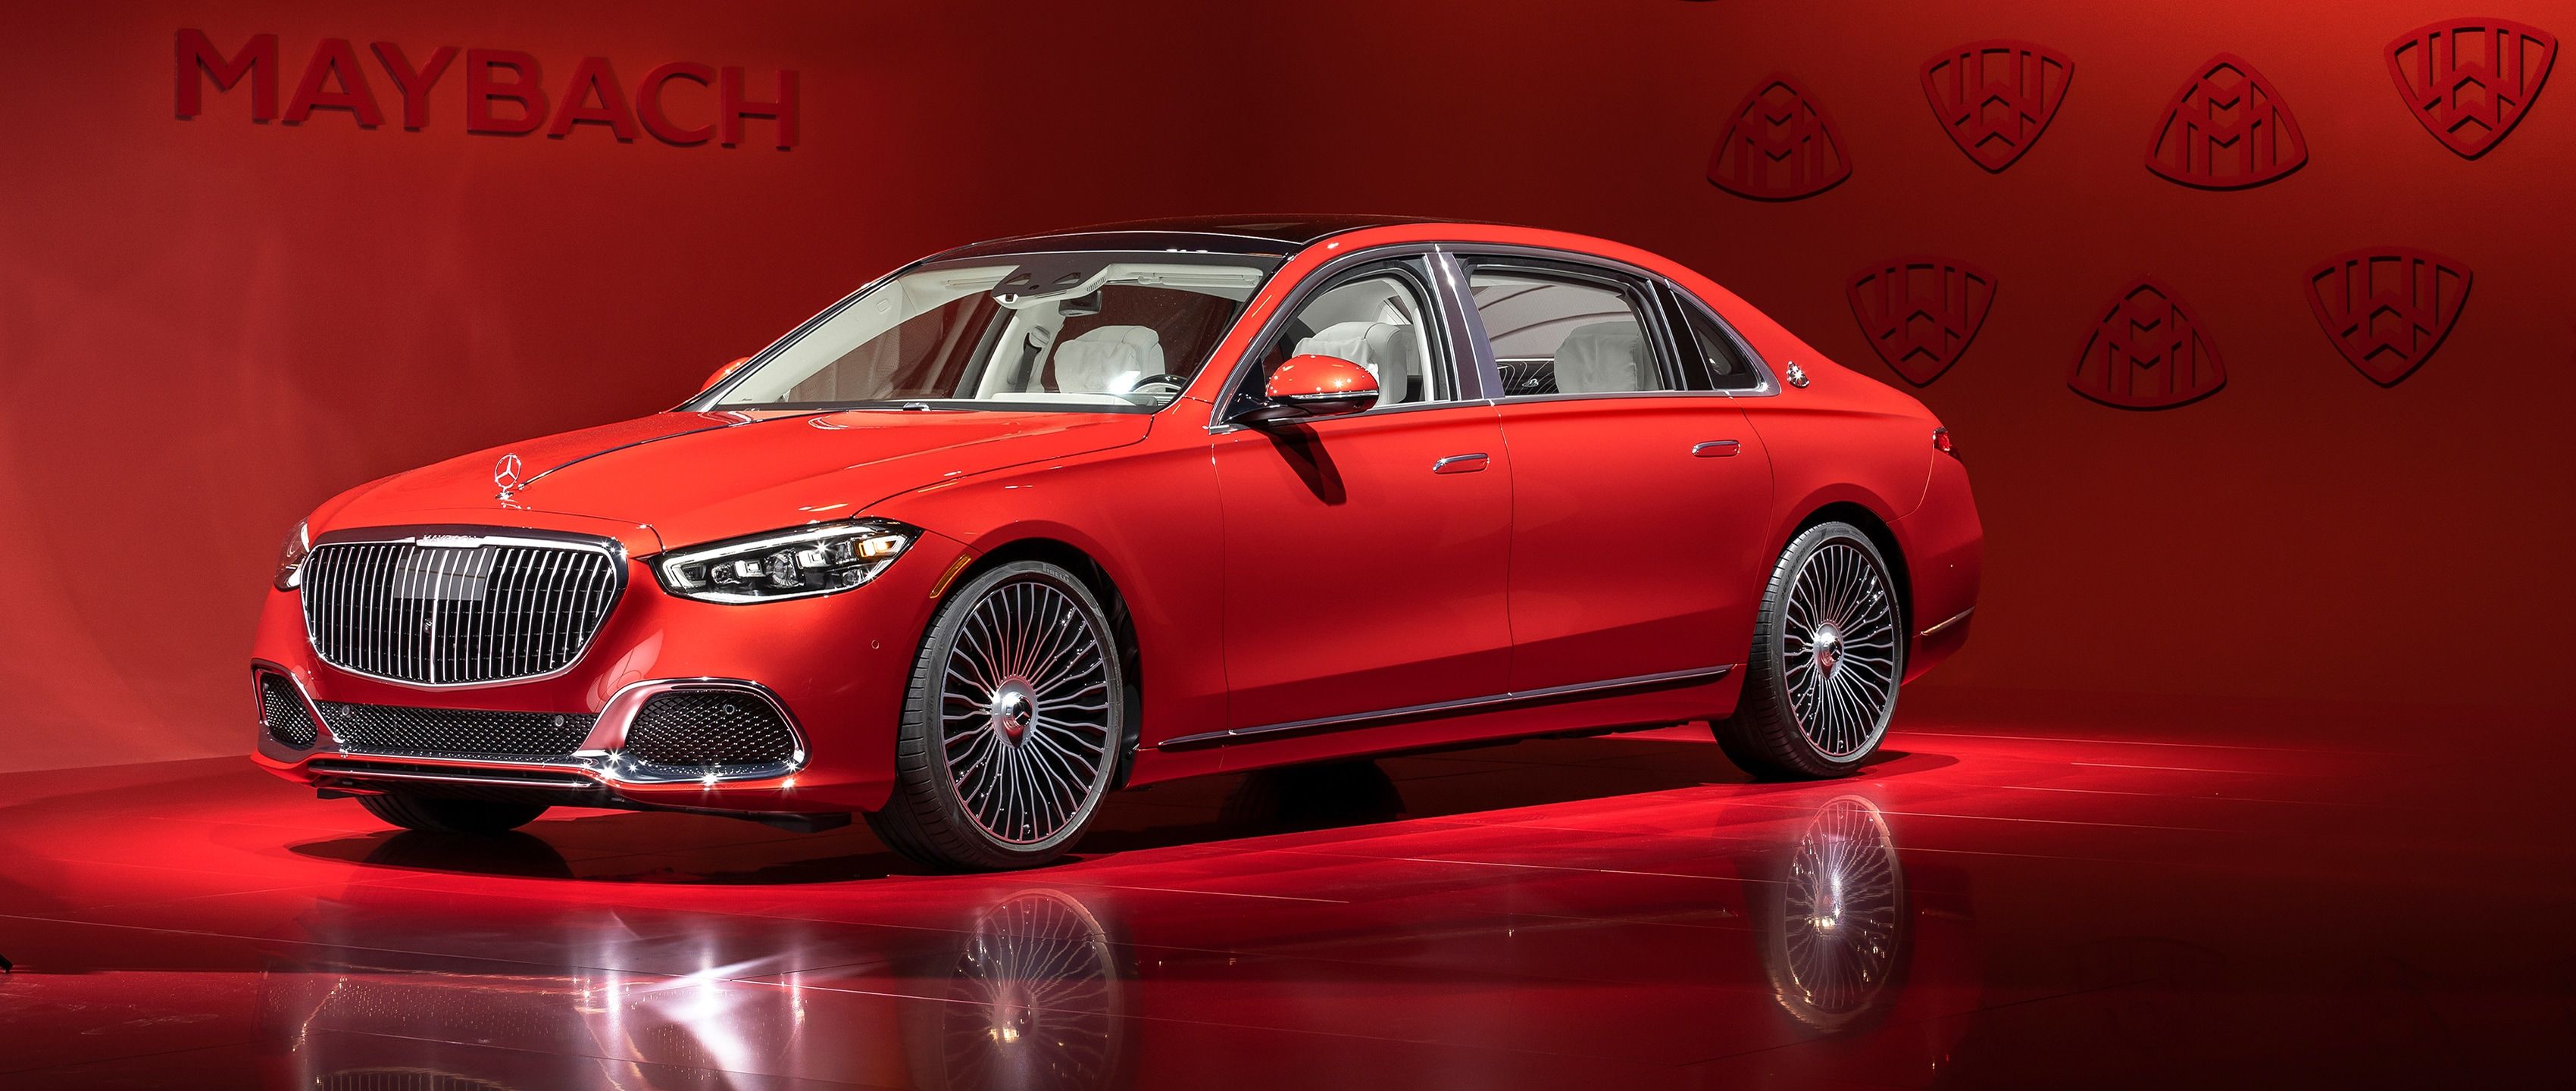 The New Mercedes Maybach S Class